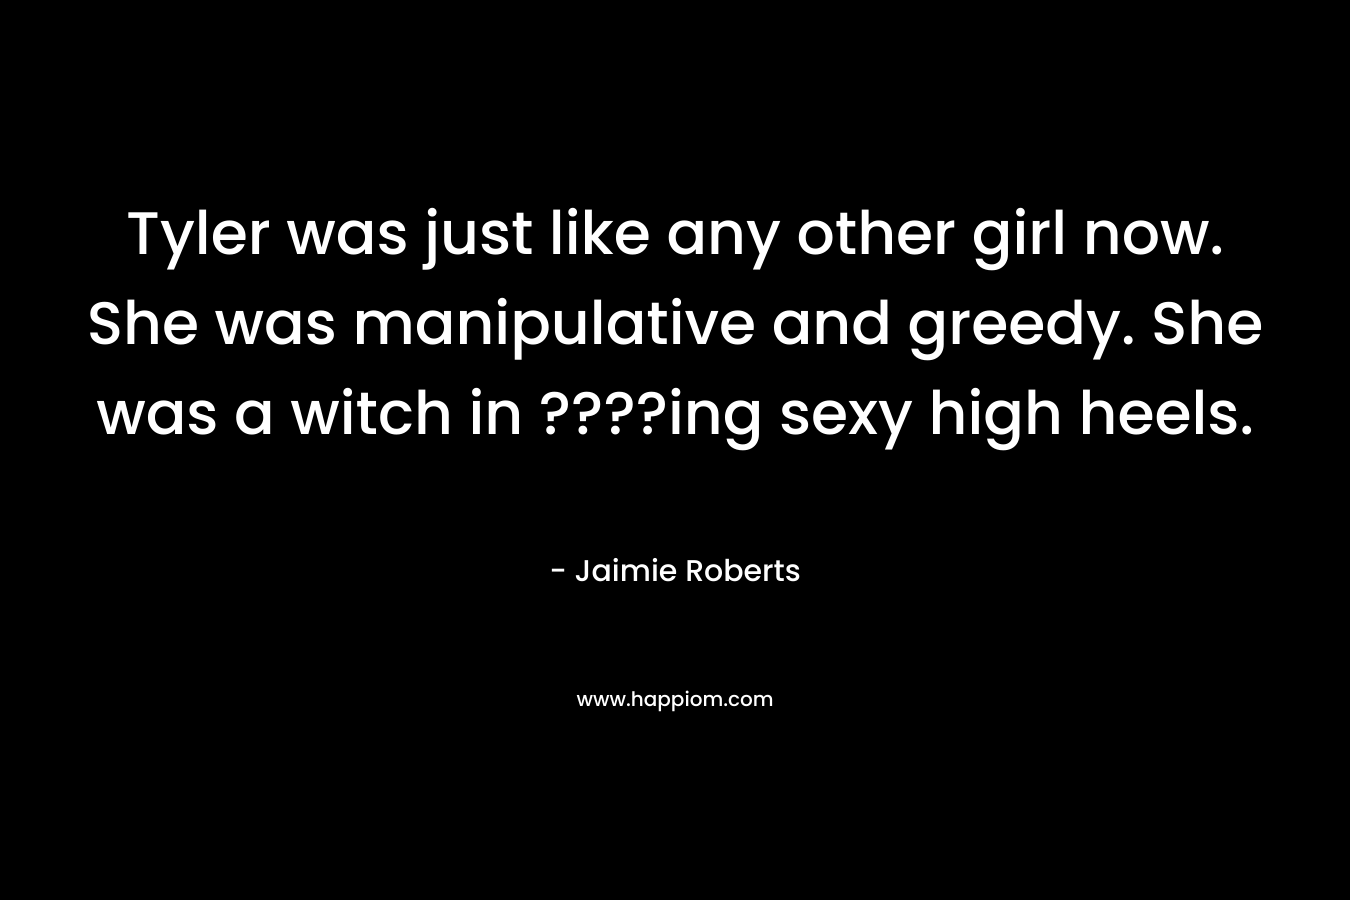 Tyler was just like any other girl now. She was manipulative and greedy. She was a witch in ????ing sexy high heels. – Jaimie Roberts